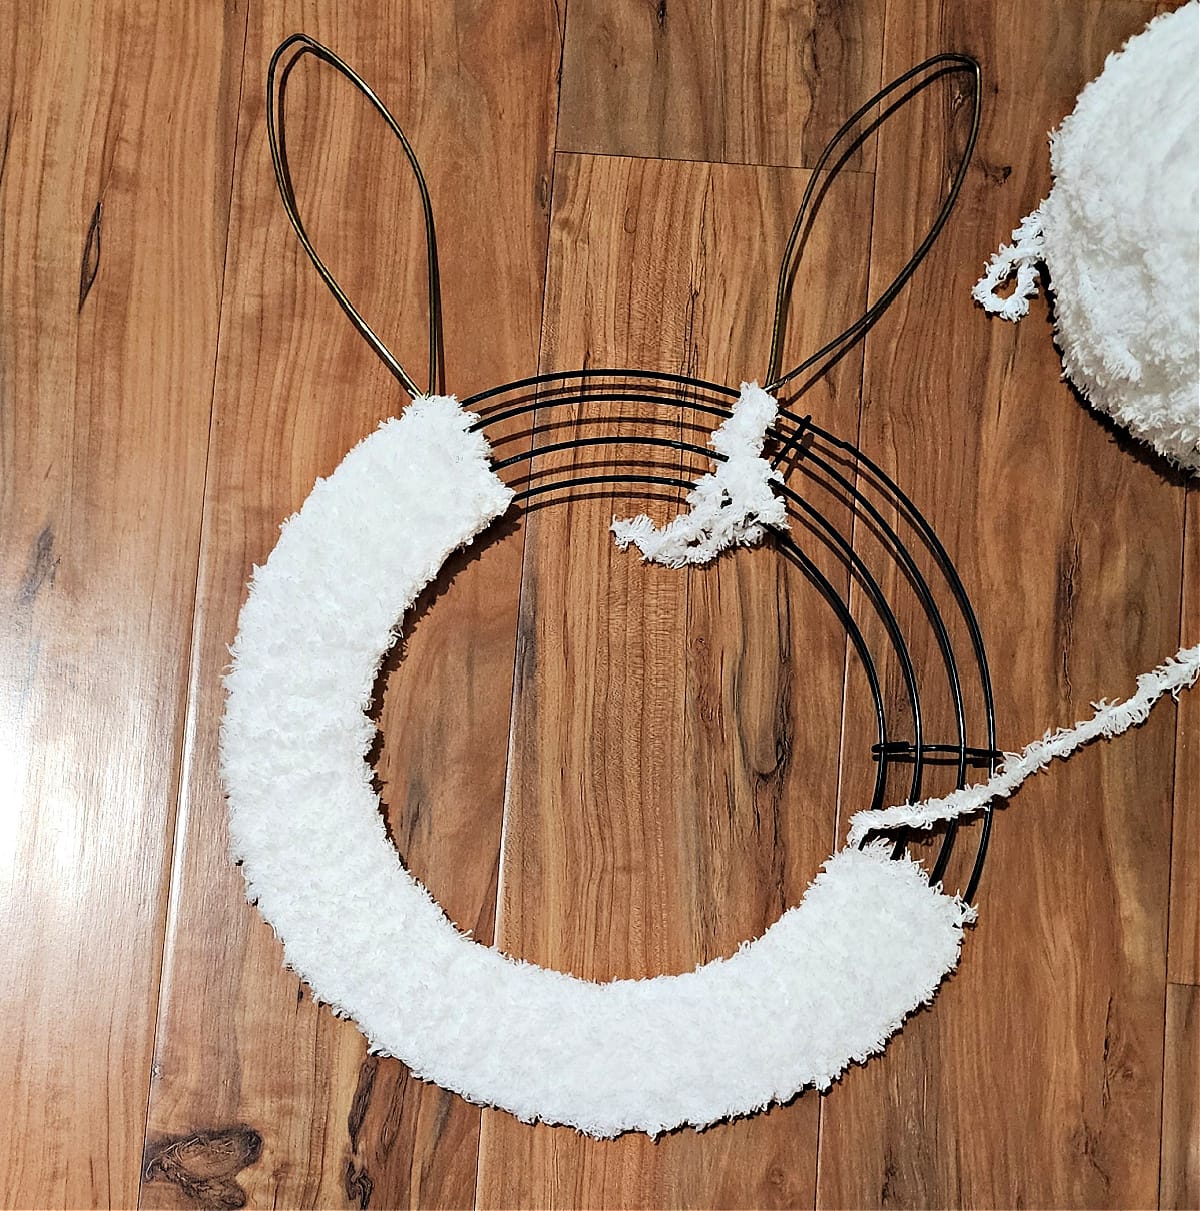 Circular portion of bunny wreath being wrapped with fuzzy yarn.